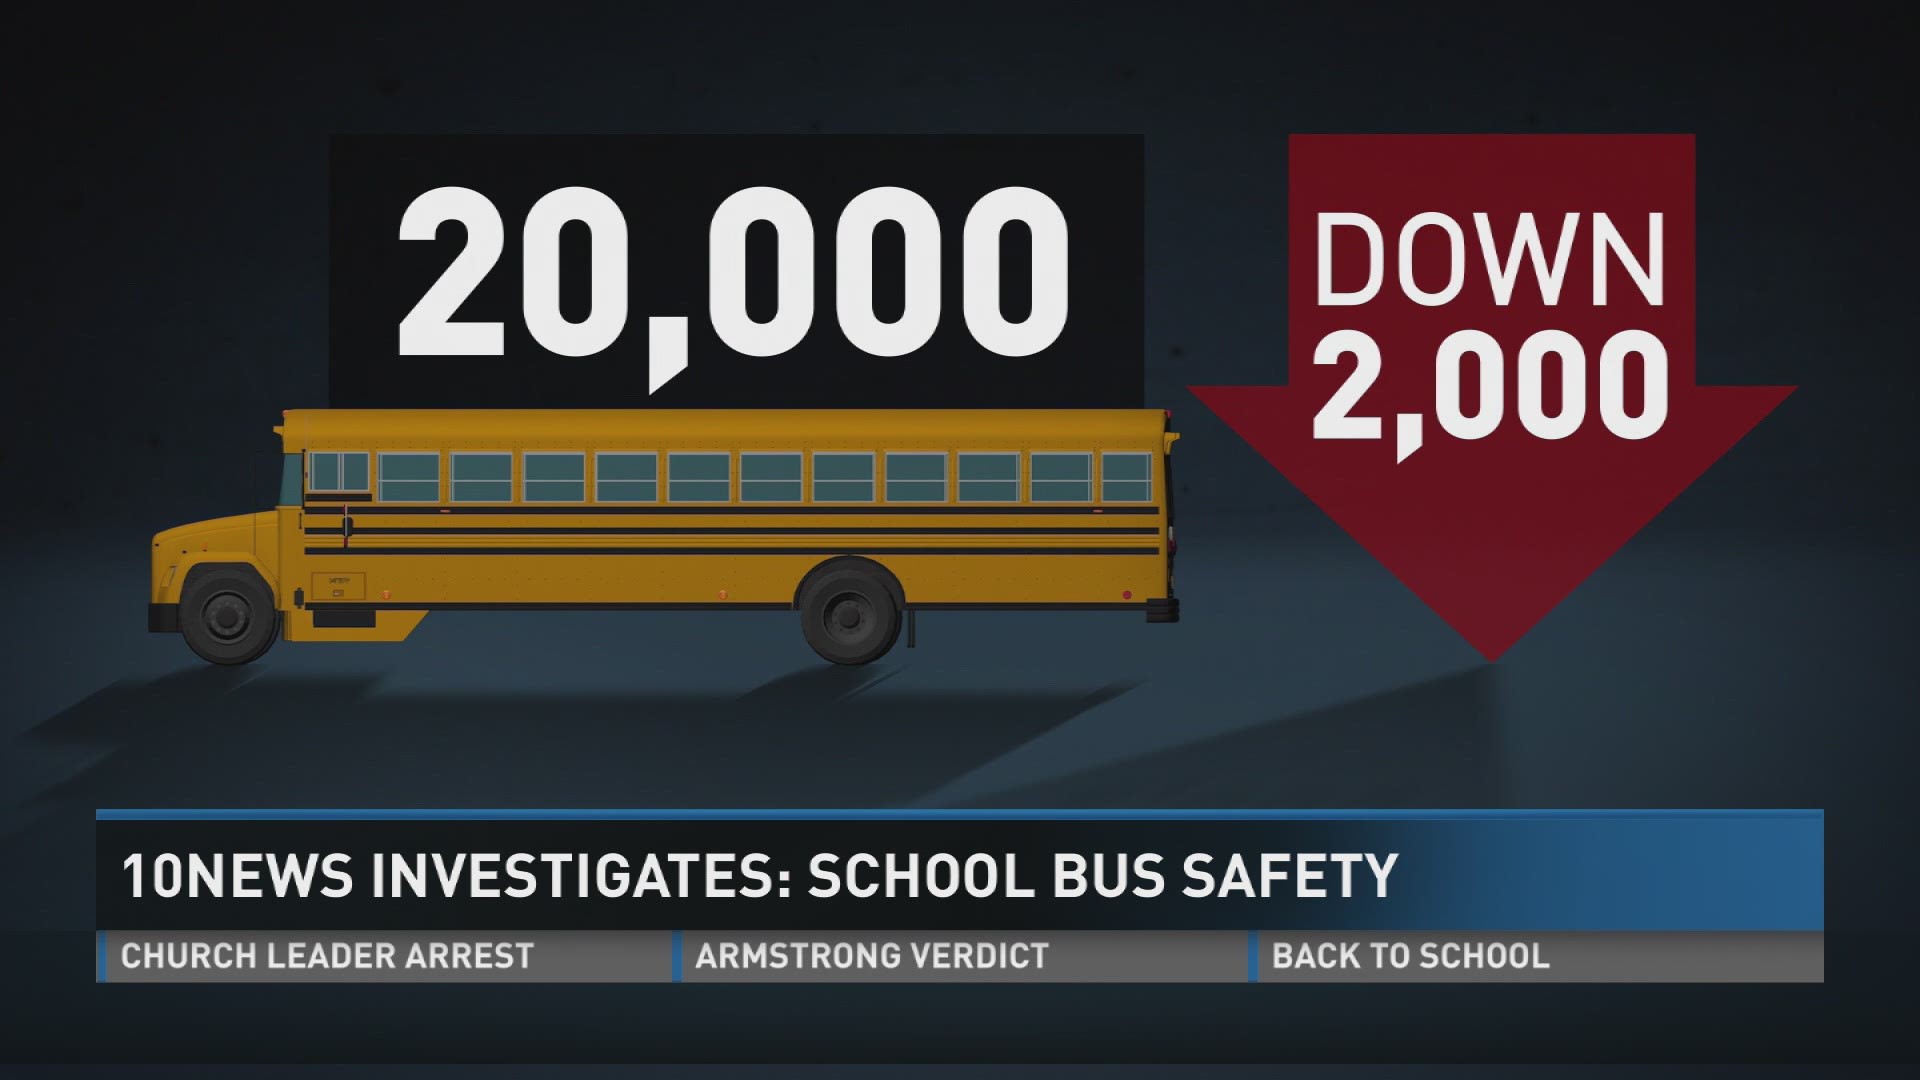 Despite problems, children on their way to school are still safer when they take the bus.